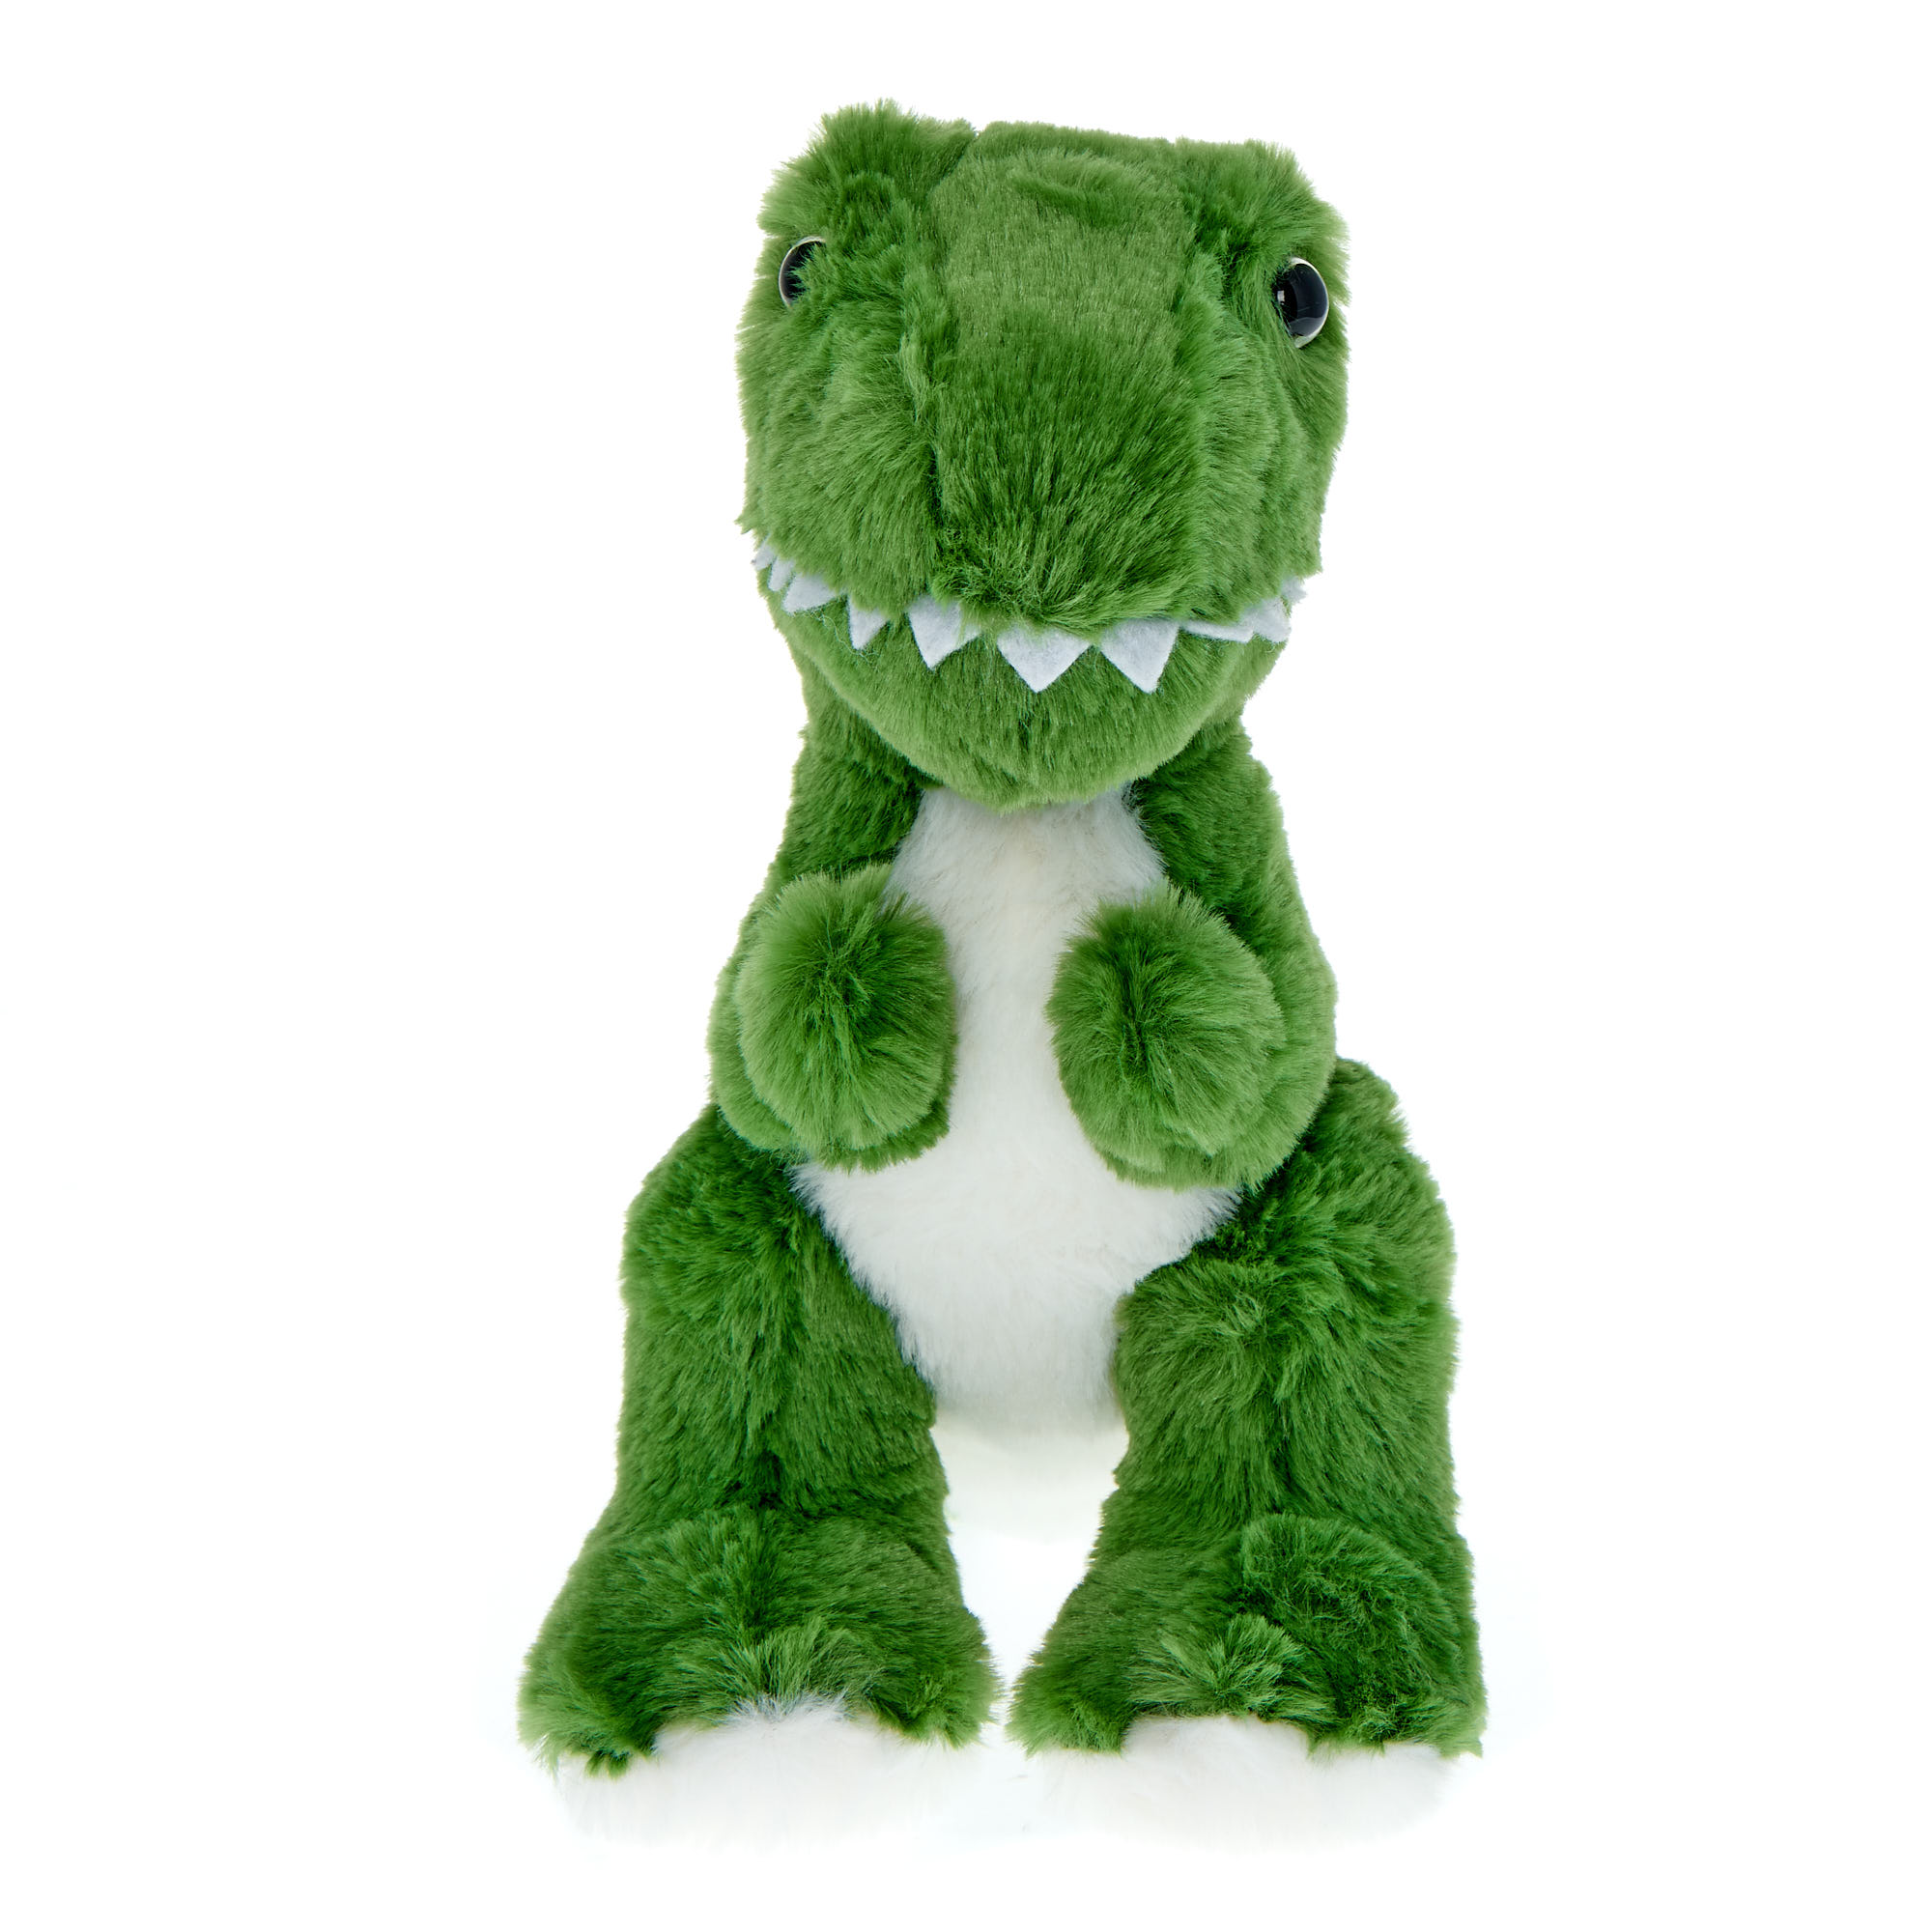 Buy Small Green Dinosaur Soft Toy for GBP 3.99